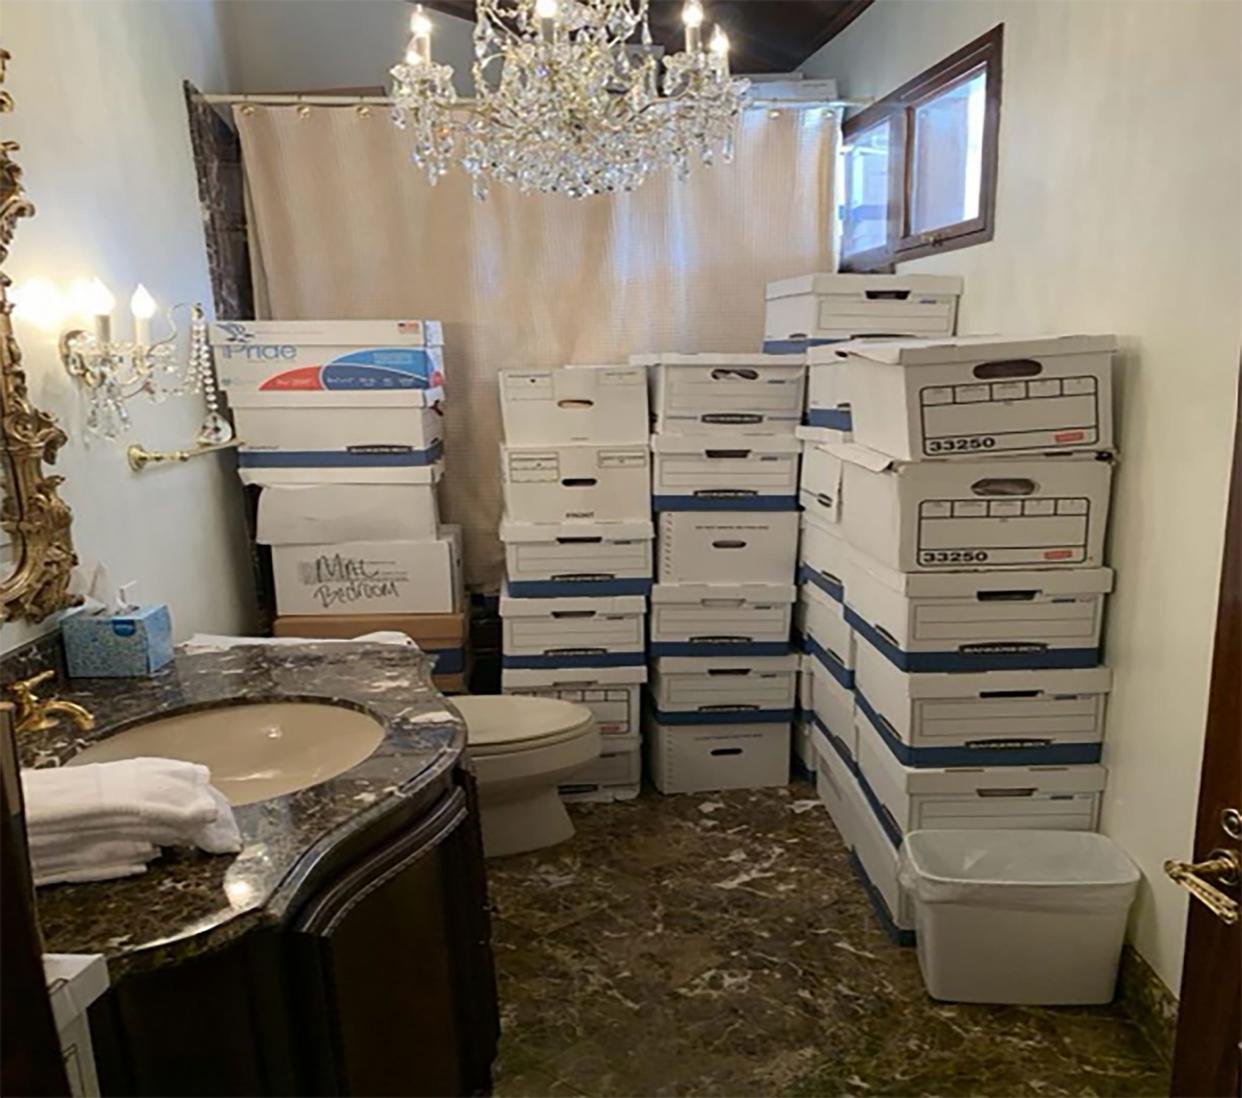 In this handout photo provided by the U.S. Department of Justice, stacks of boxes can be observed in a bathroom and shower in The Mar-a-Lago Club’s Lake Room at former U.S. President Donald Trump's Mar-a-Lago estate in Palm Beach, Florida. Former President Donald Trump has been indicted on 37 felony counts in the special counsel's classified documents probe.